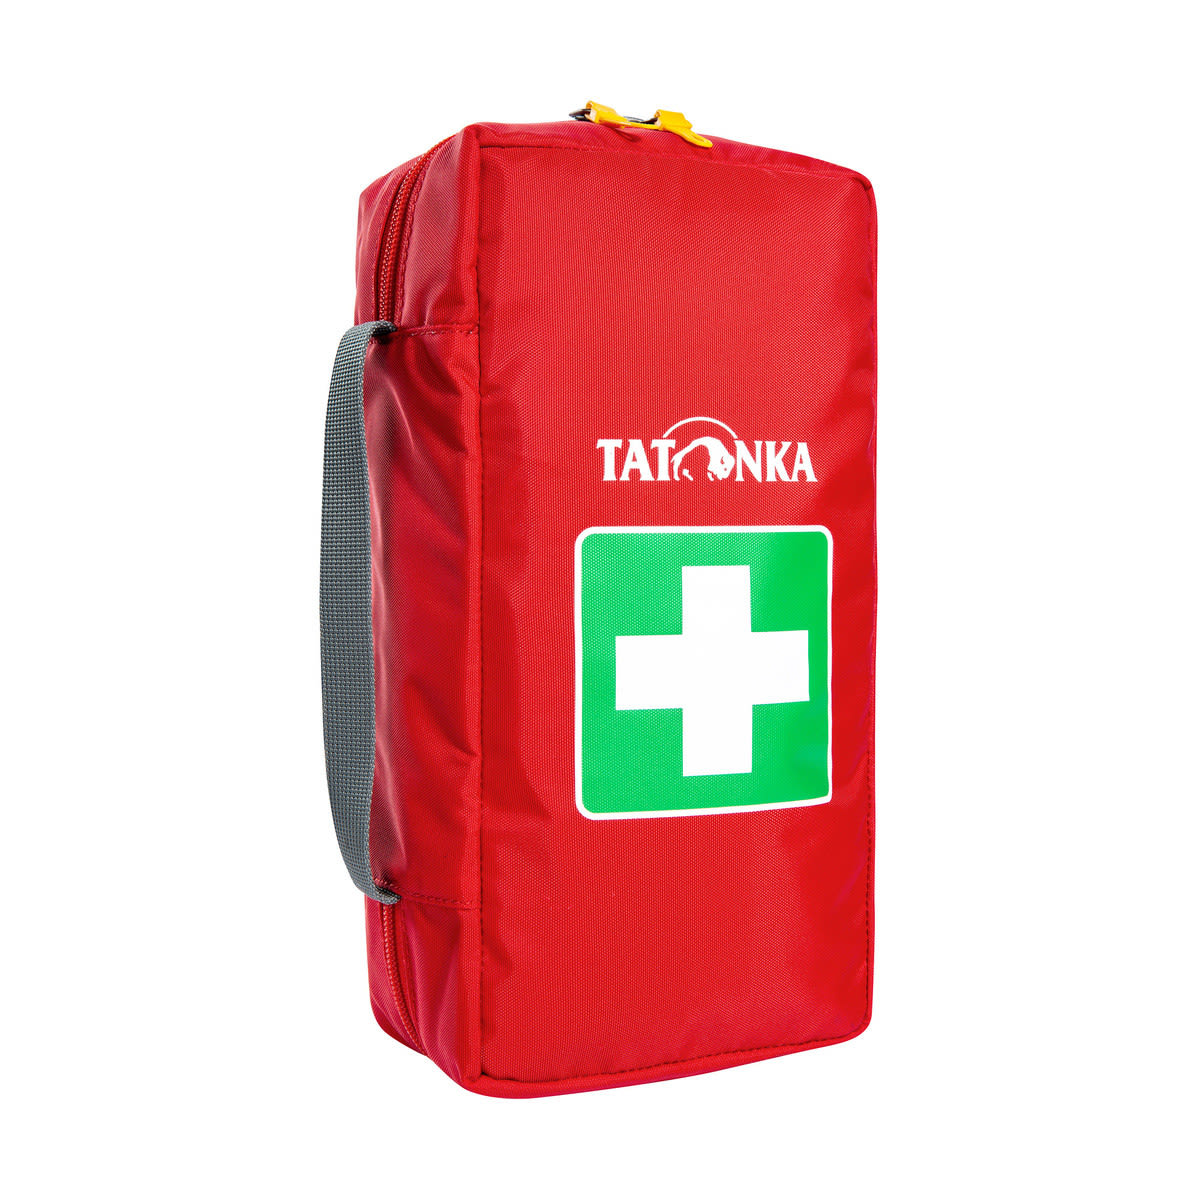 Tatonka First AID Rot- Erste Hilfe und Notfallausrstung- Grsse One Size - Farbe Red